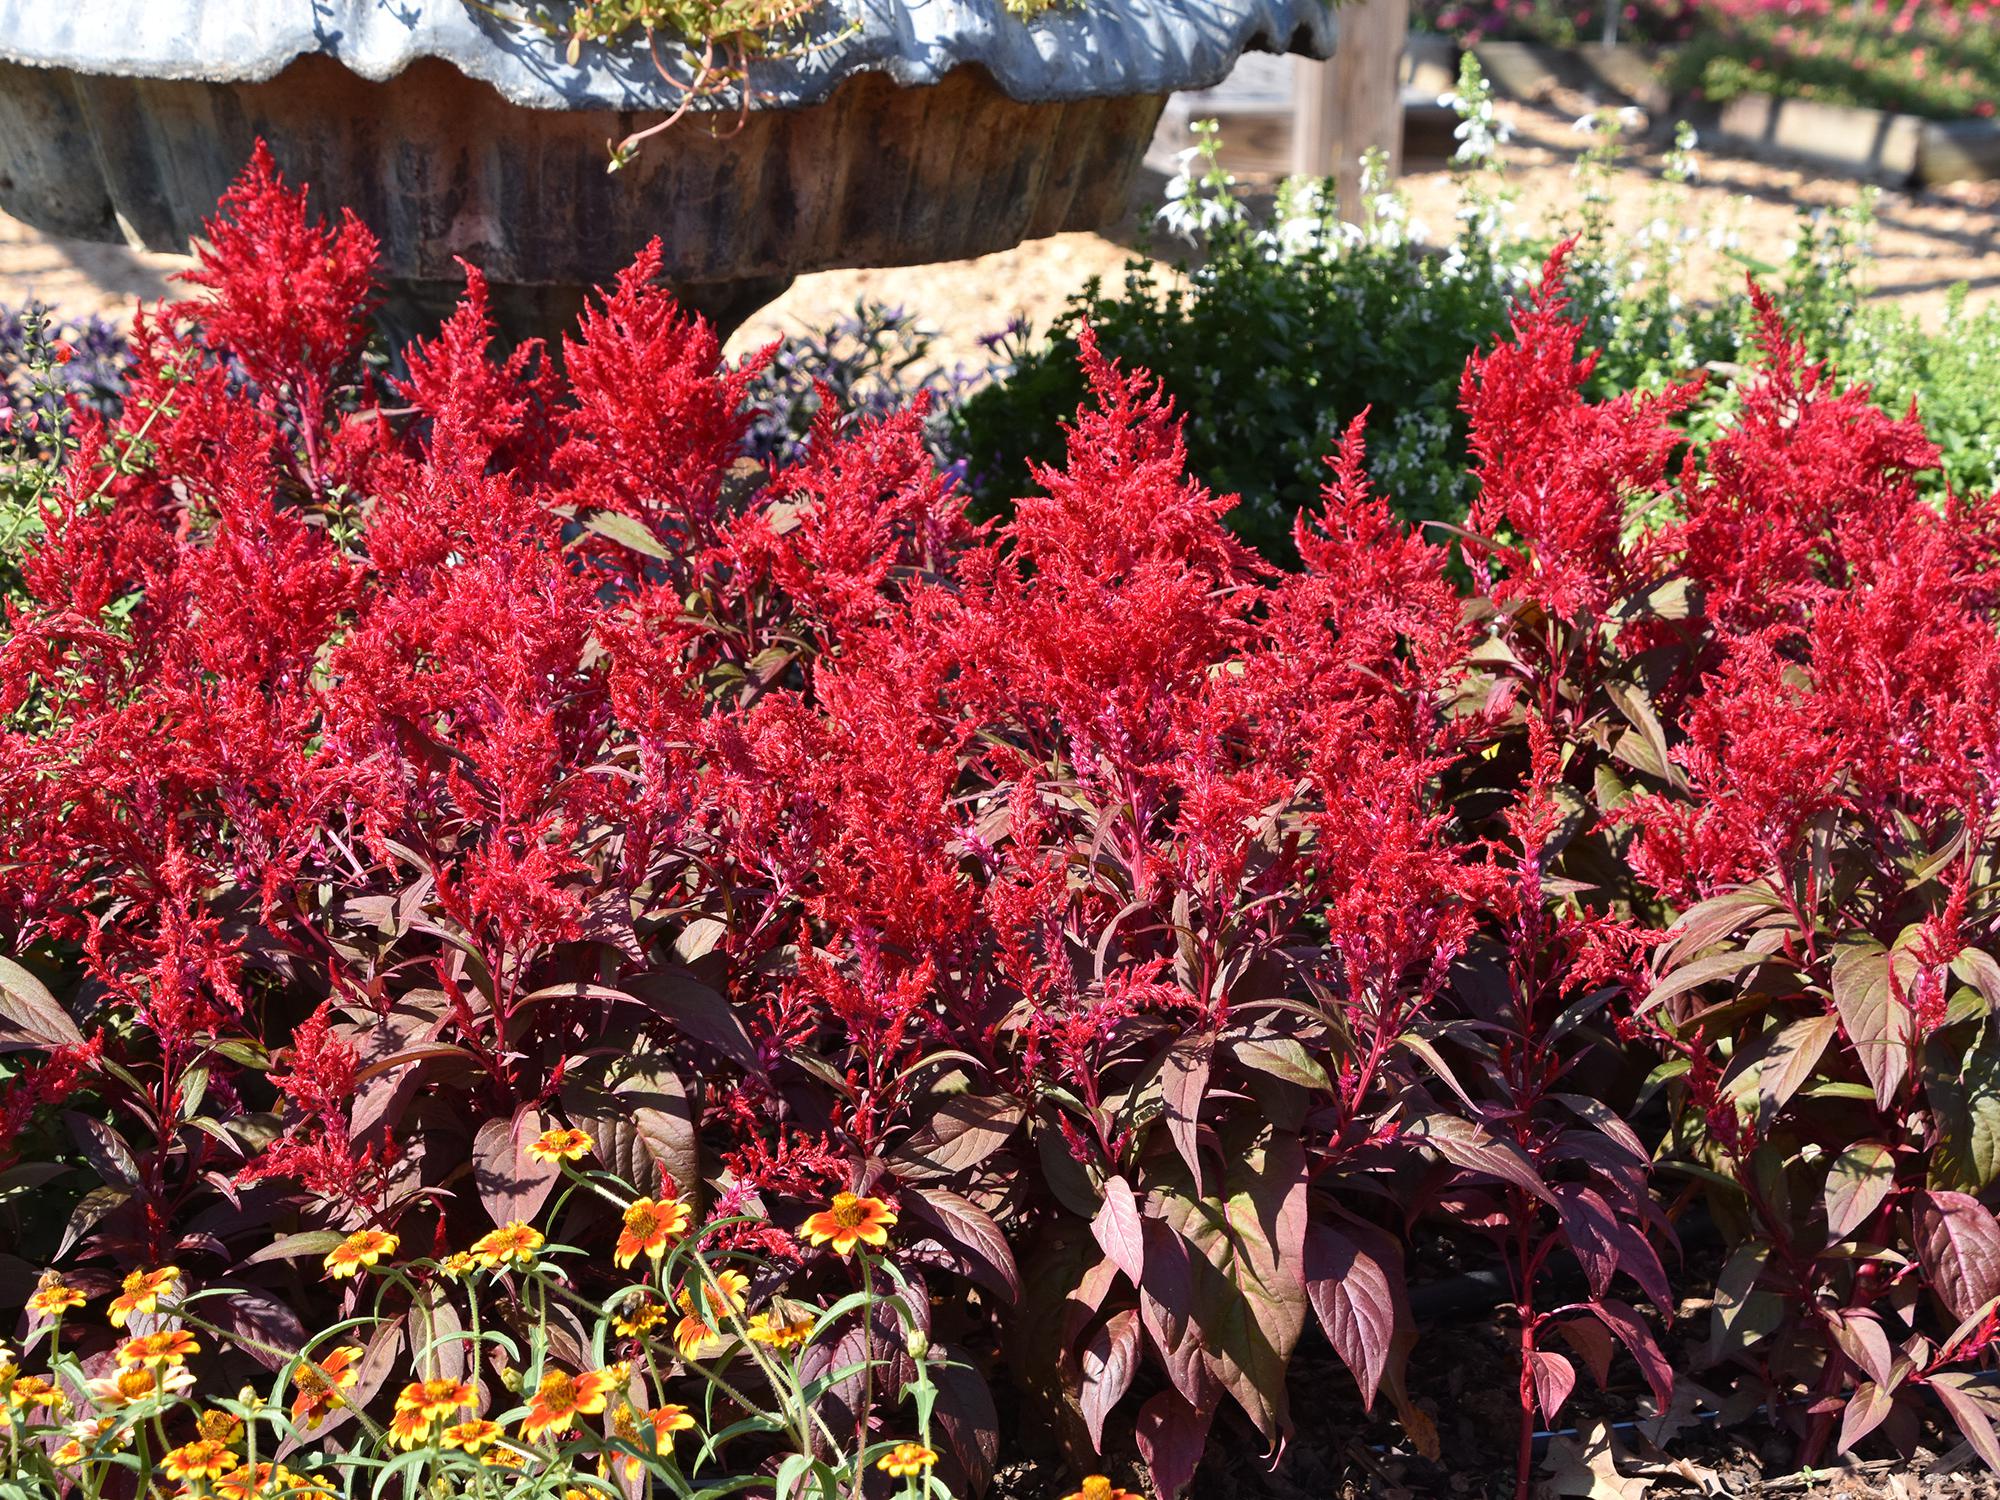 Dragon’s Breath celosias grow equally well in the landscape bed or in a patio container. Its unique red-green foliage is topped with blazing red, feathery flowers. (Photo by MSU Extension/Gary Bachman)